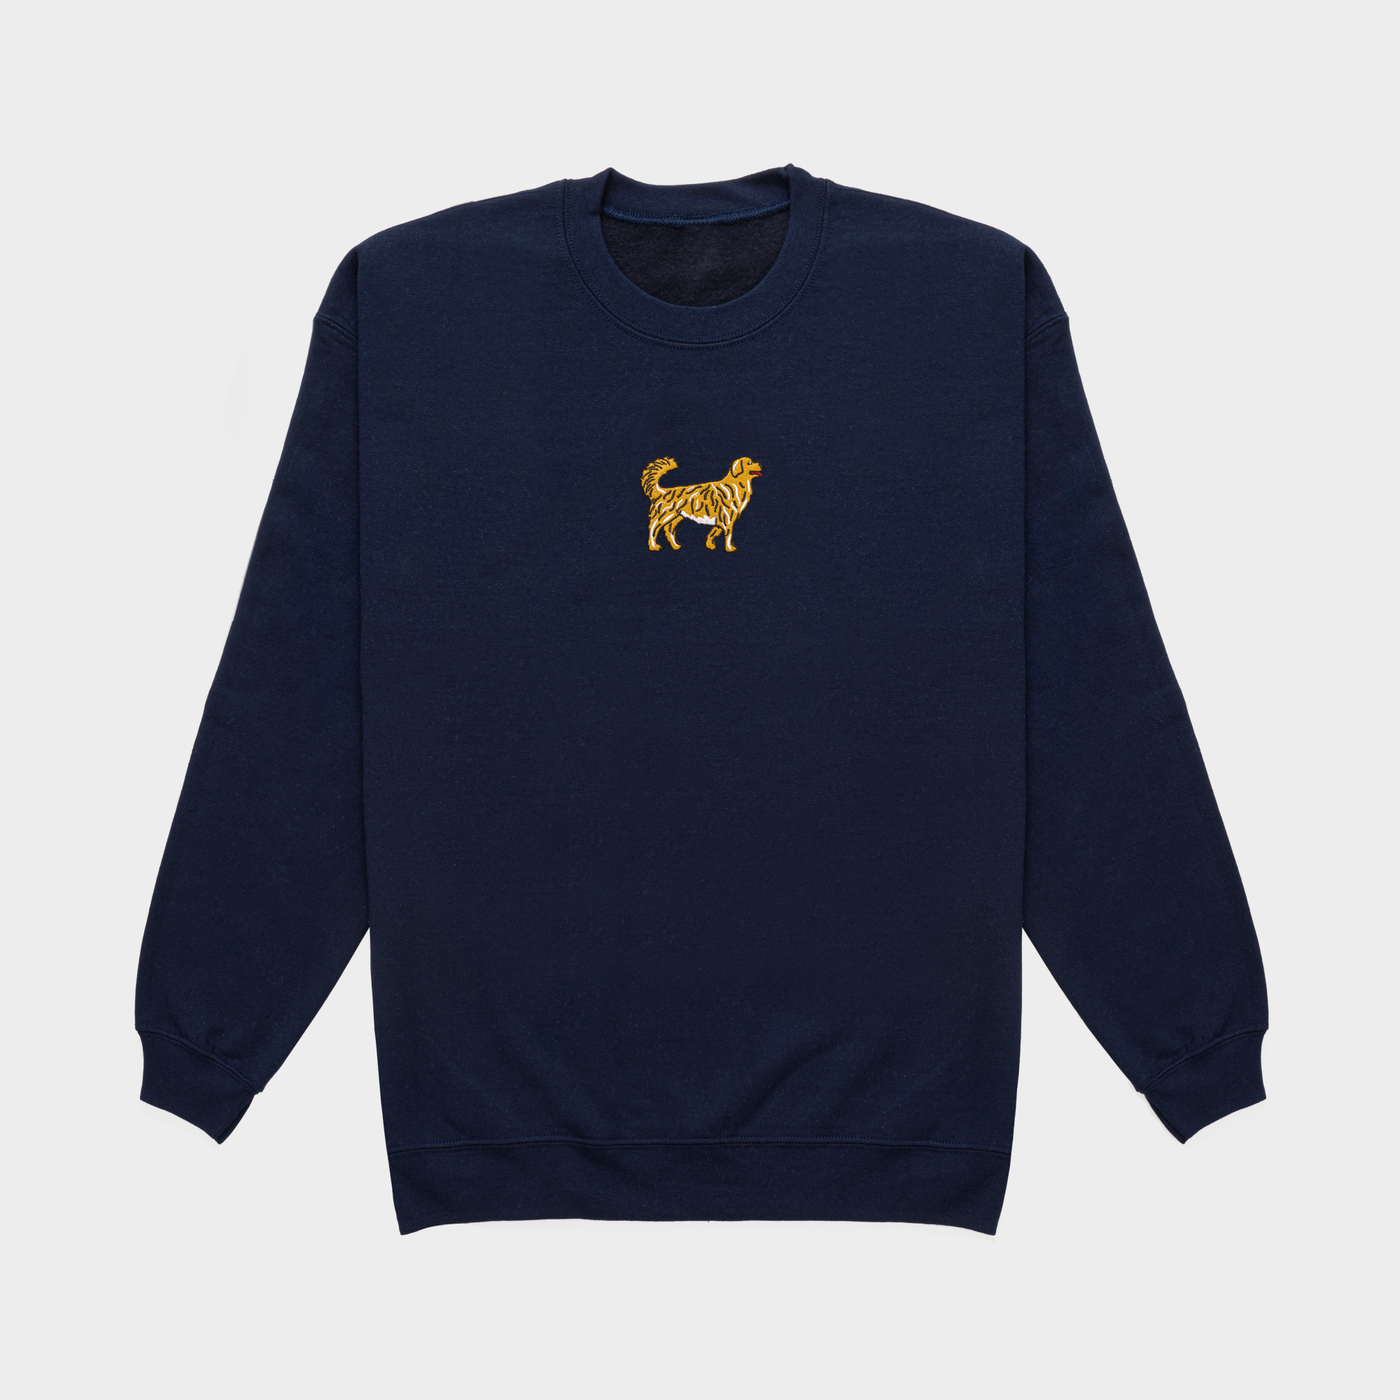 Bobby's Planet Men's Embroidered Golden Retriever Sweatshirt from Paws Dog Cat Animals Collection in Navy Color#color_navy